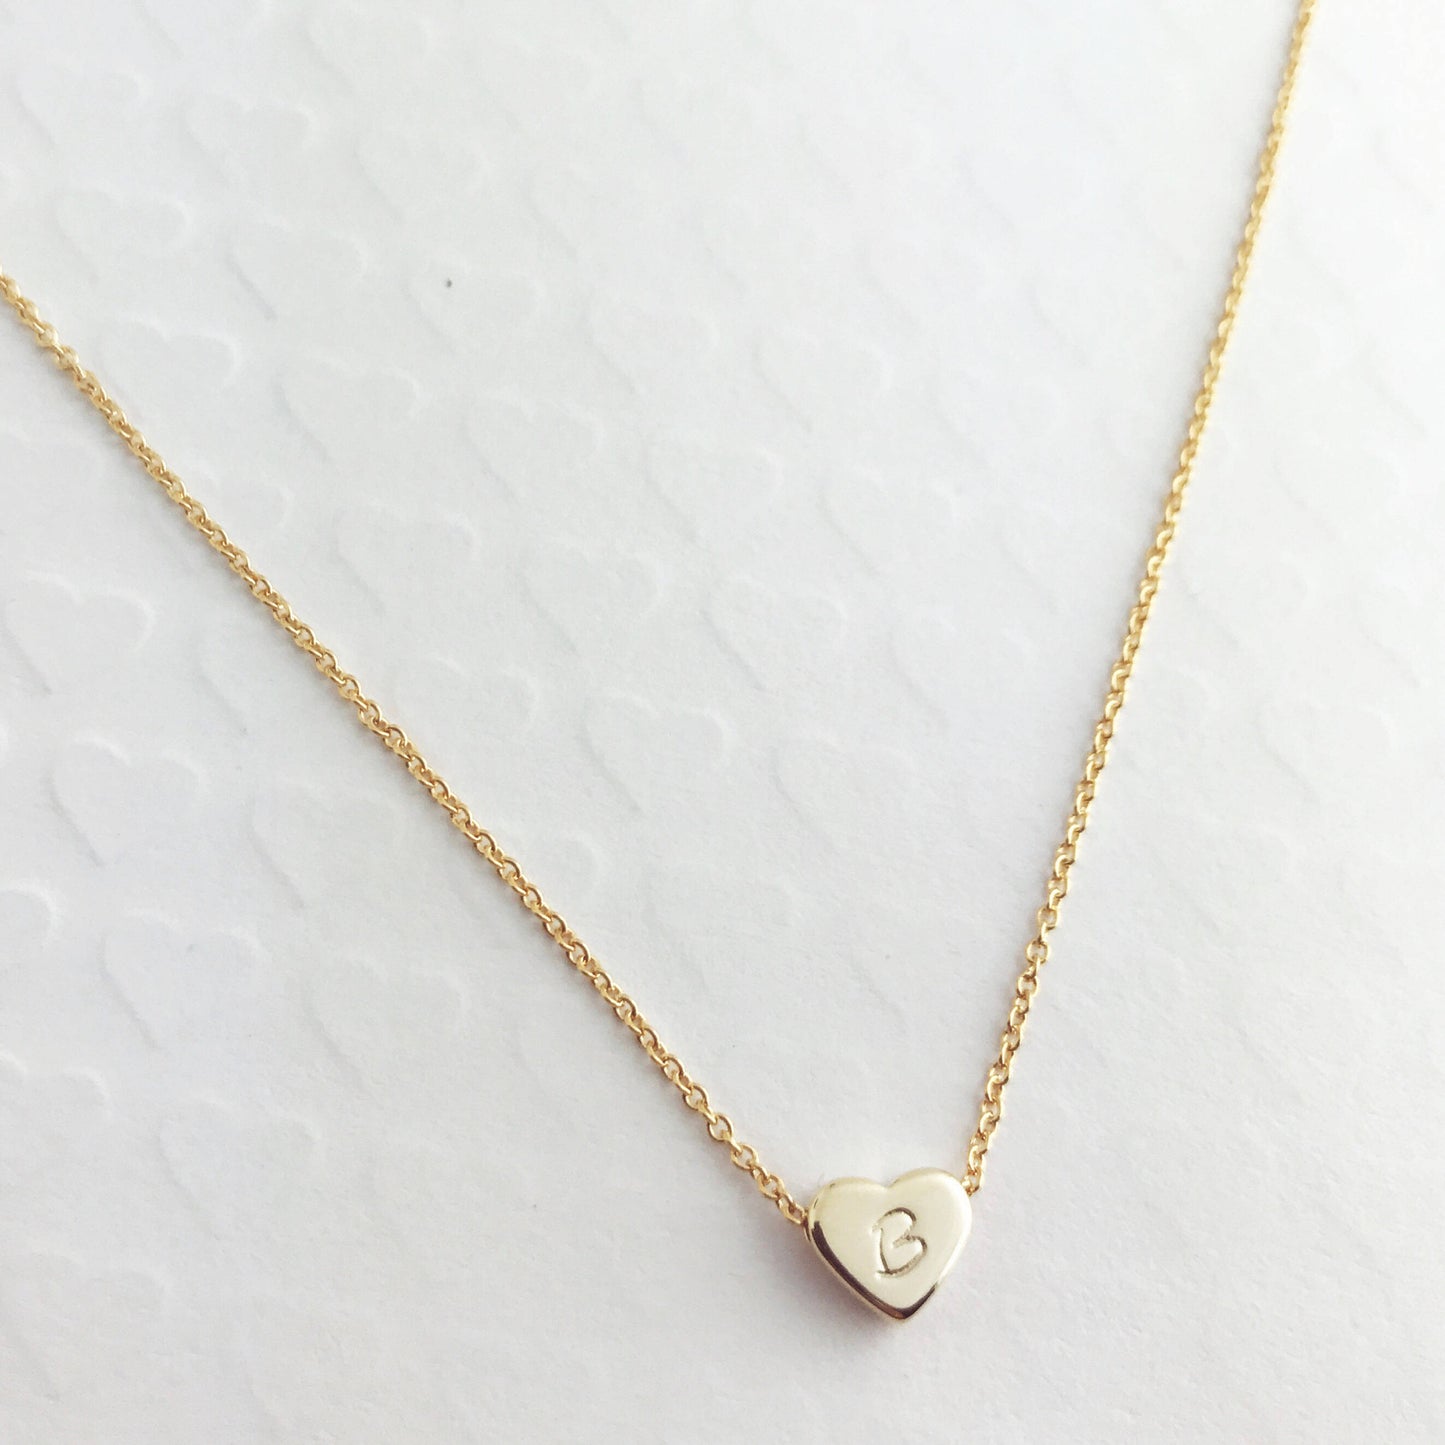 Personalized Initial Heart necklace